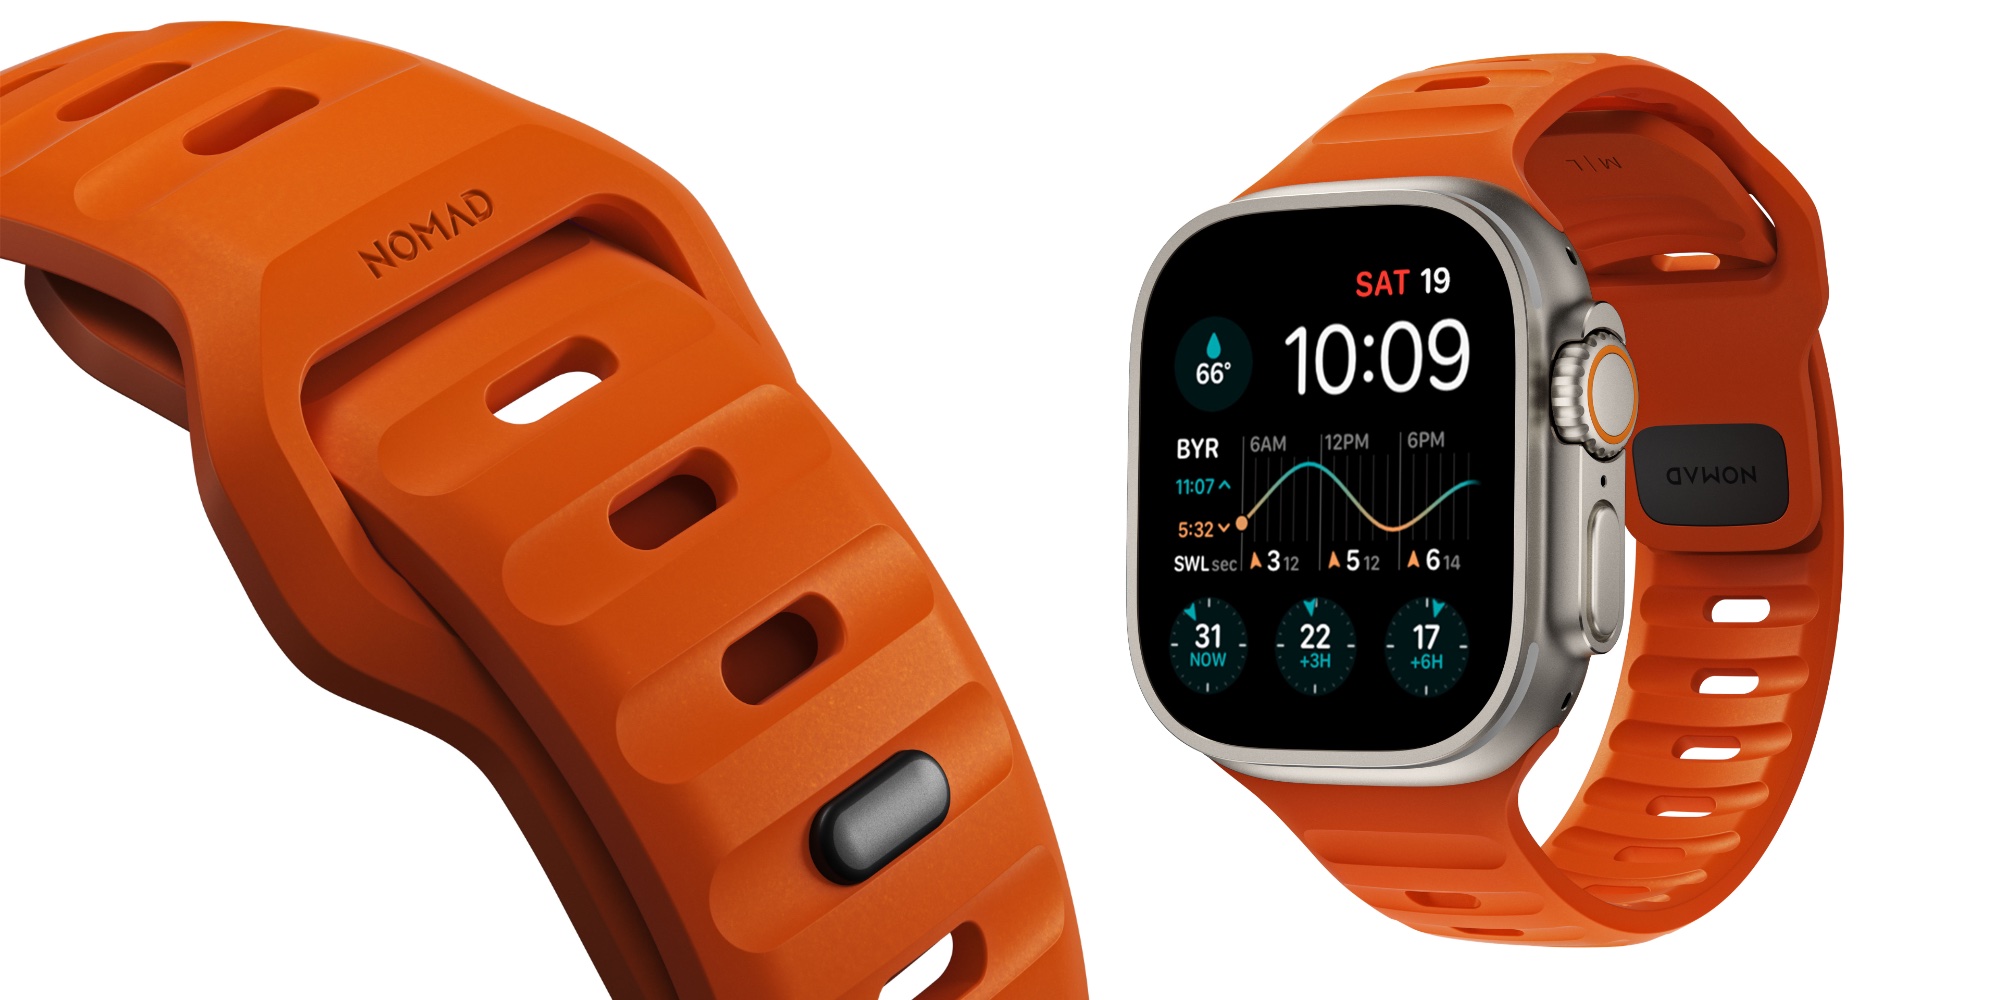 Nomad Apple Watch Ultra bands Waterproof bands a rugged as the watch   ZDNET